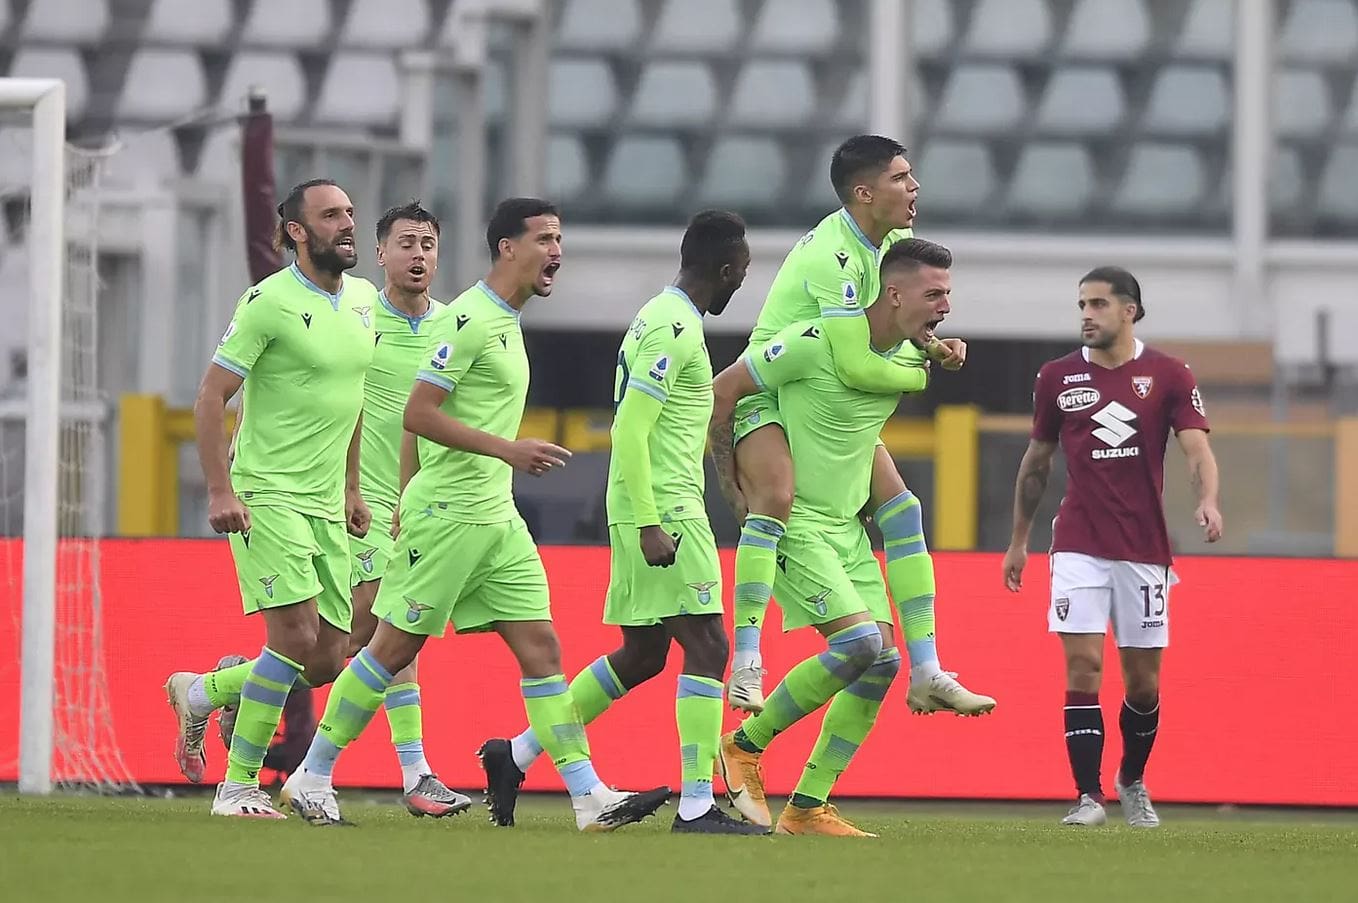 Lazio Vs Torino Preview Tips And Odds Sportingpedia Latest Sports News From All Over The World